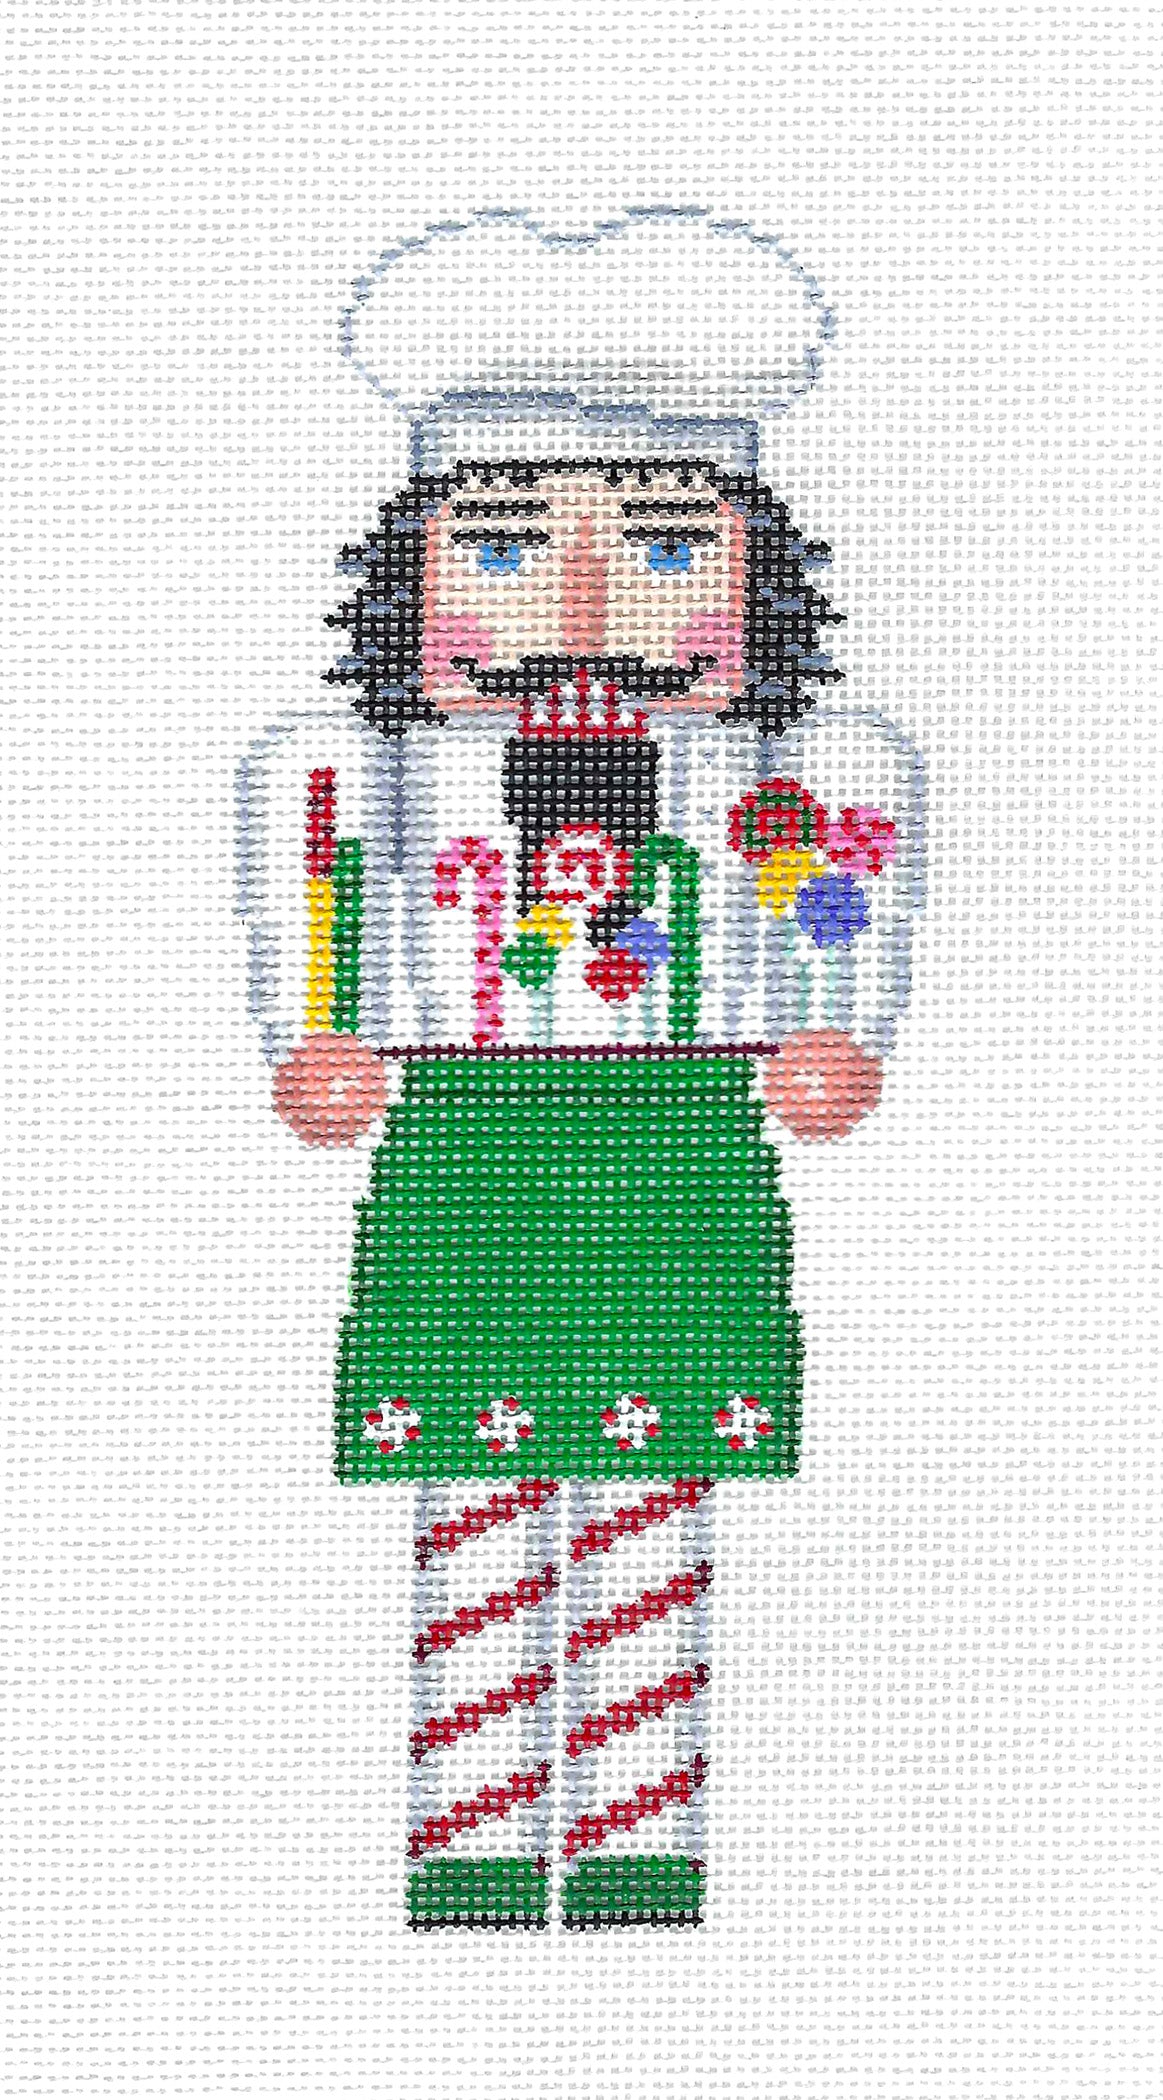 Nutcracker ~ Candy Maker Nutcracker with Sweets handpainted Needlepoint Ornament by Susan Roberts